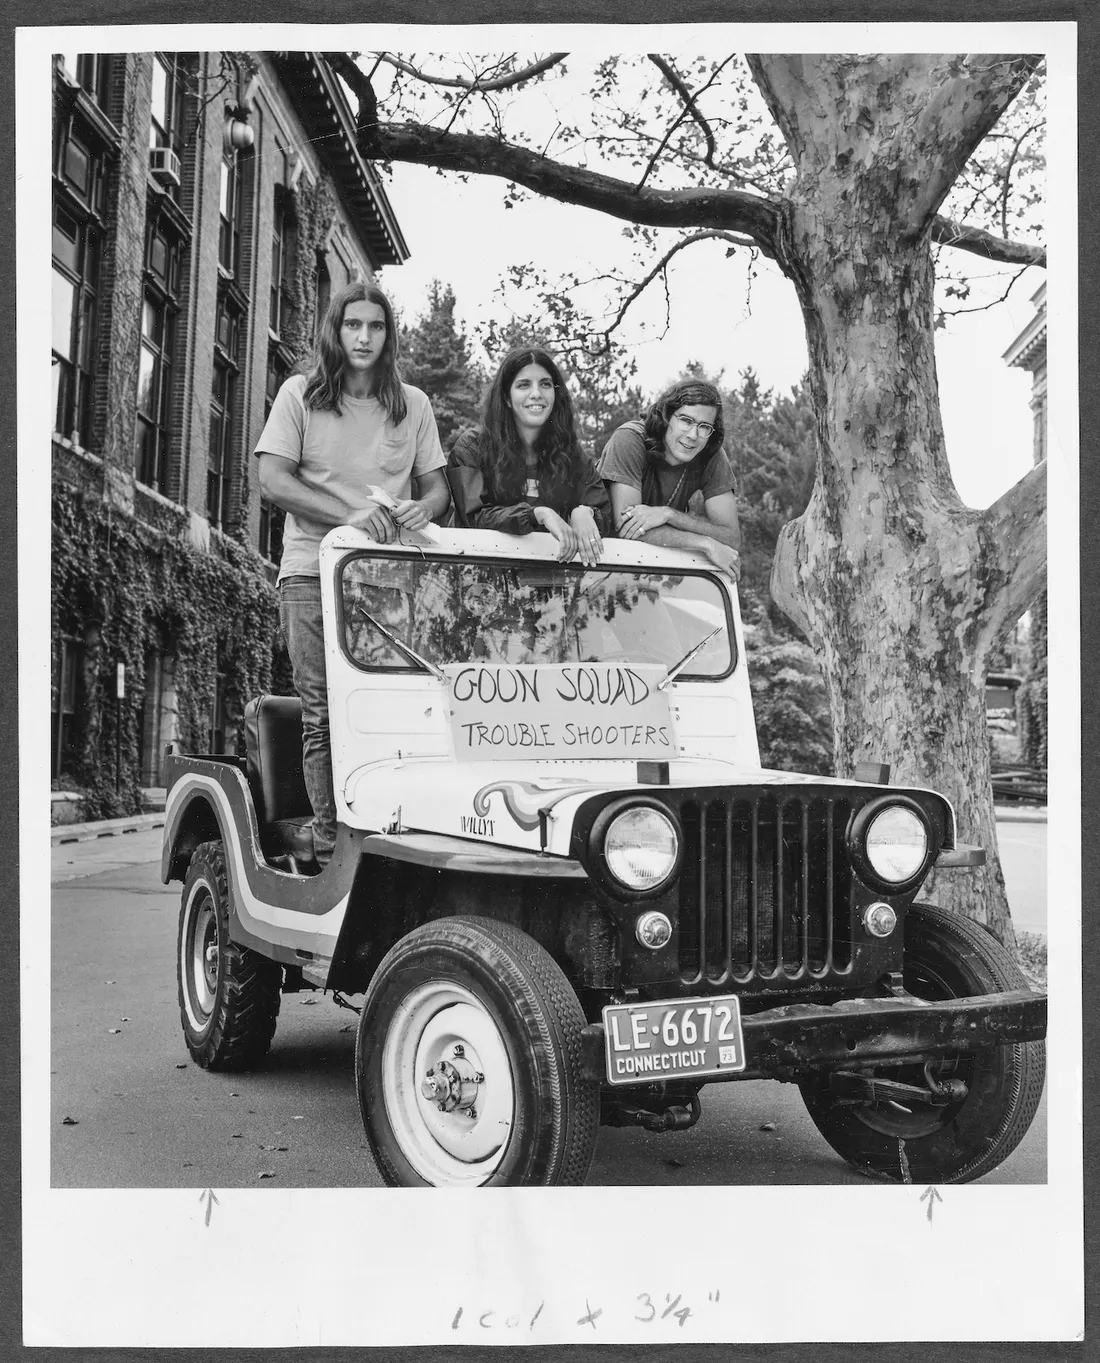 goon squad members pose in Jeep in photo from 1970s